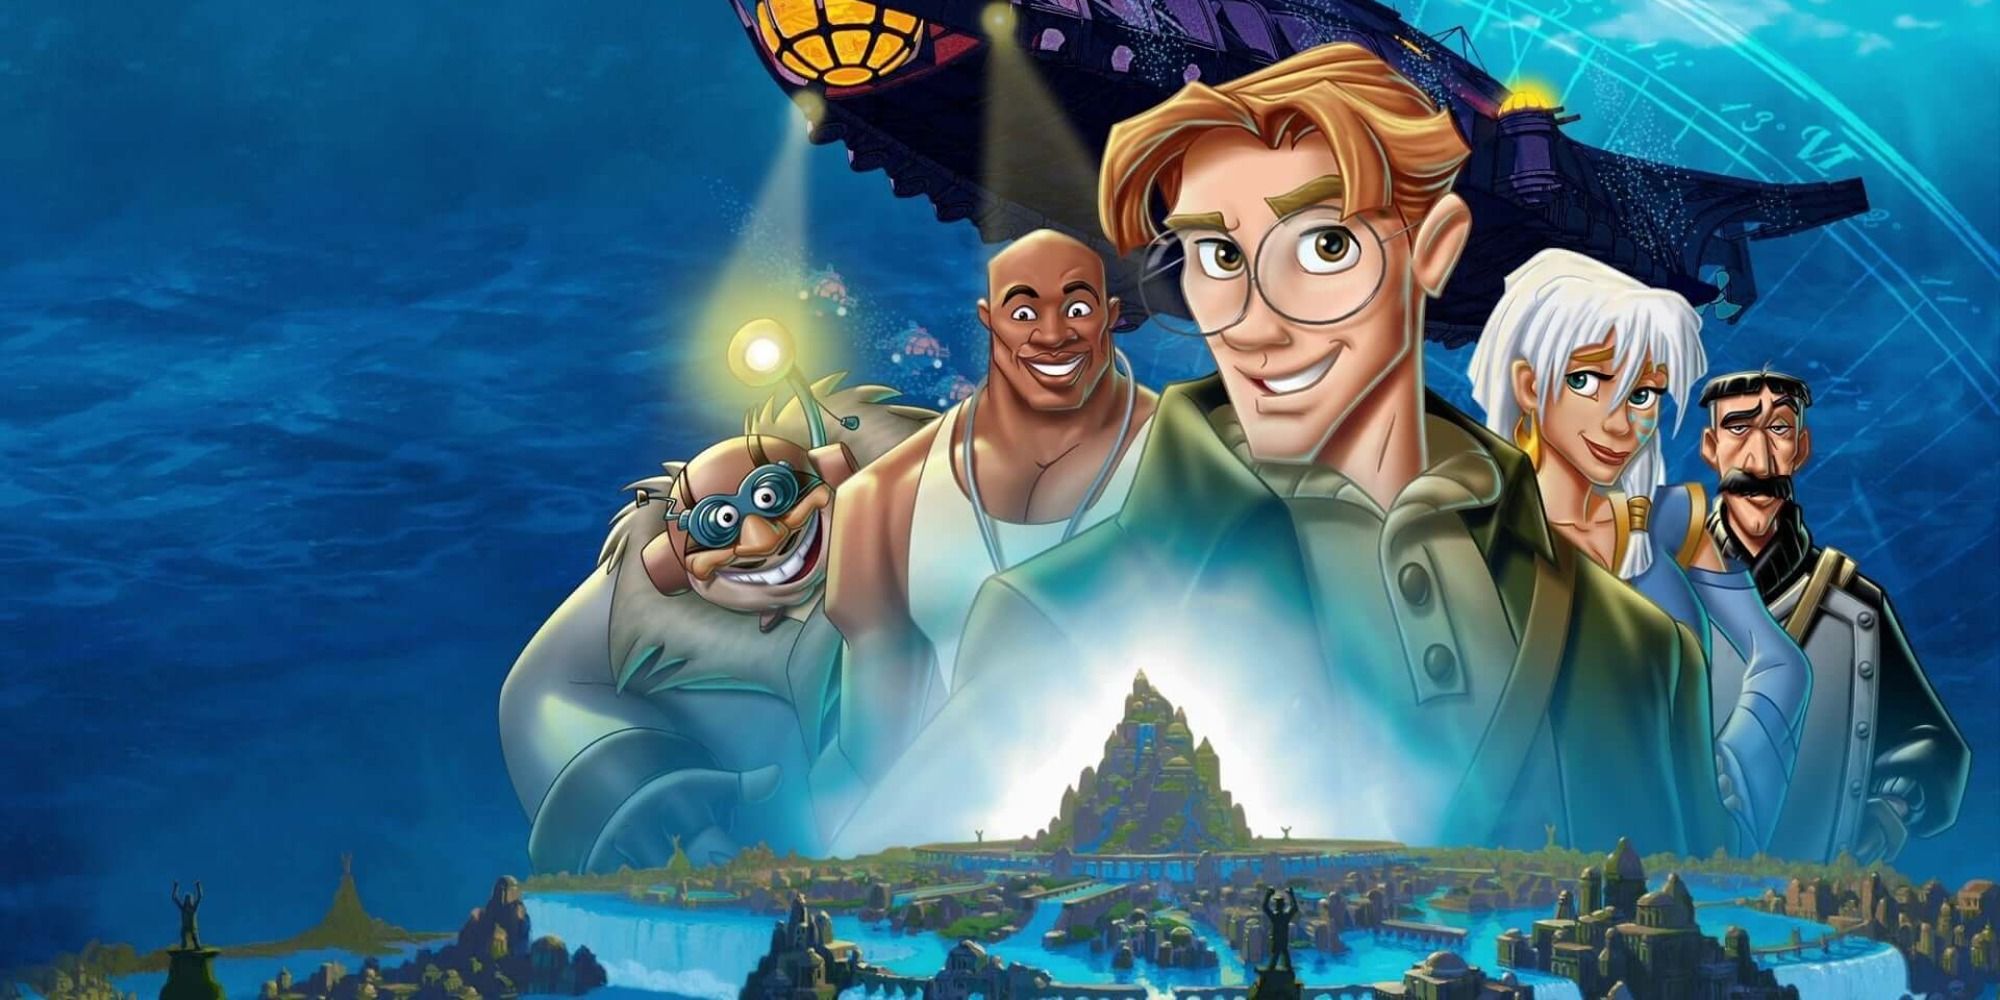 Disney Treasure Planet & 8 Other Movie Flops That Deserve More Attention